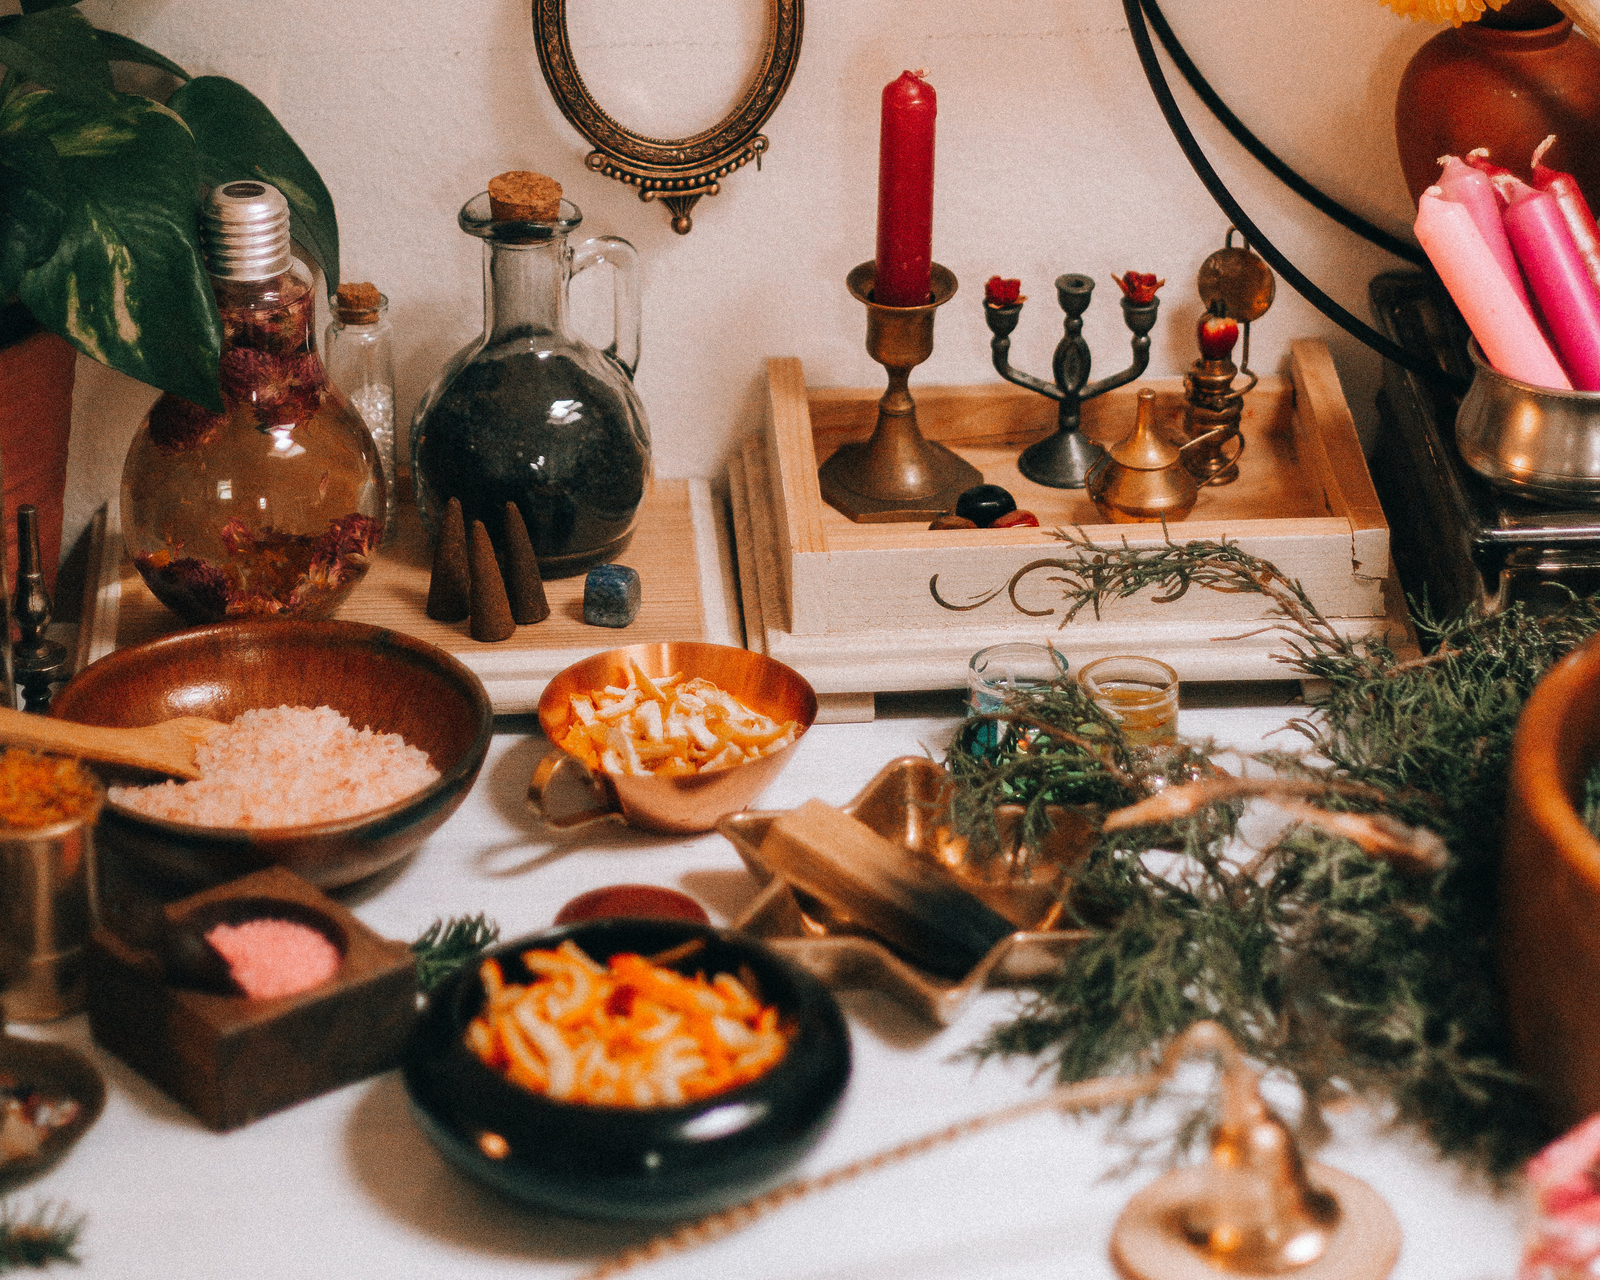 in this picture you can see a kitchen witchery, a lot of herbs, spices, fruits, candles and everything else you need to make a magical simmer pot.